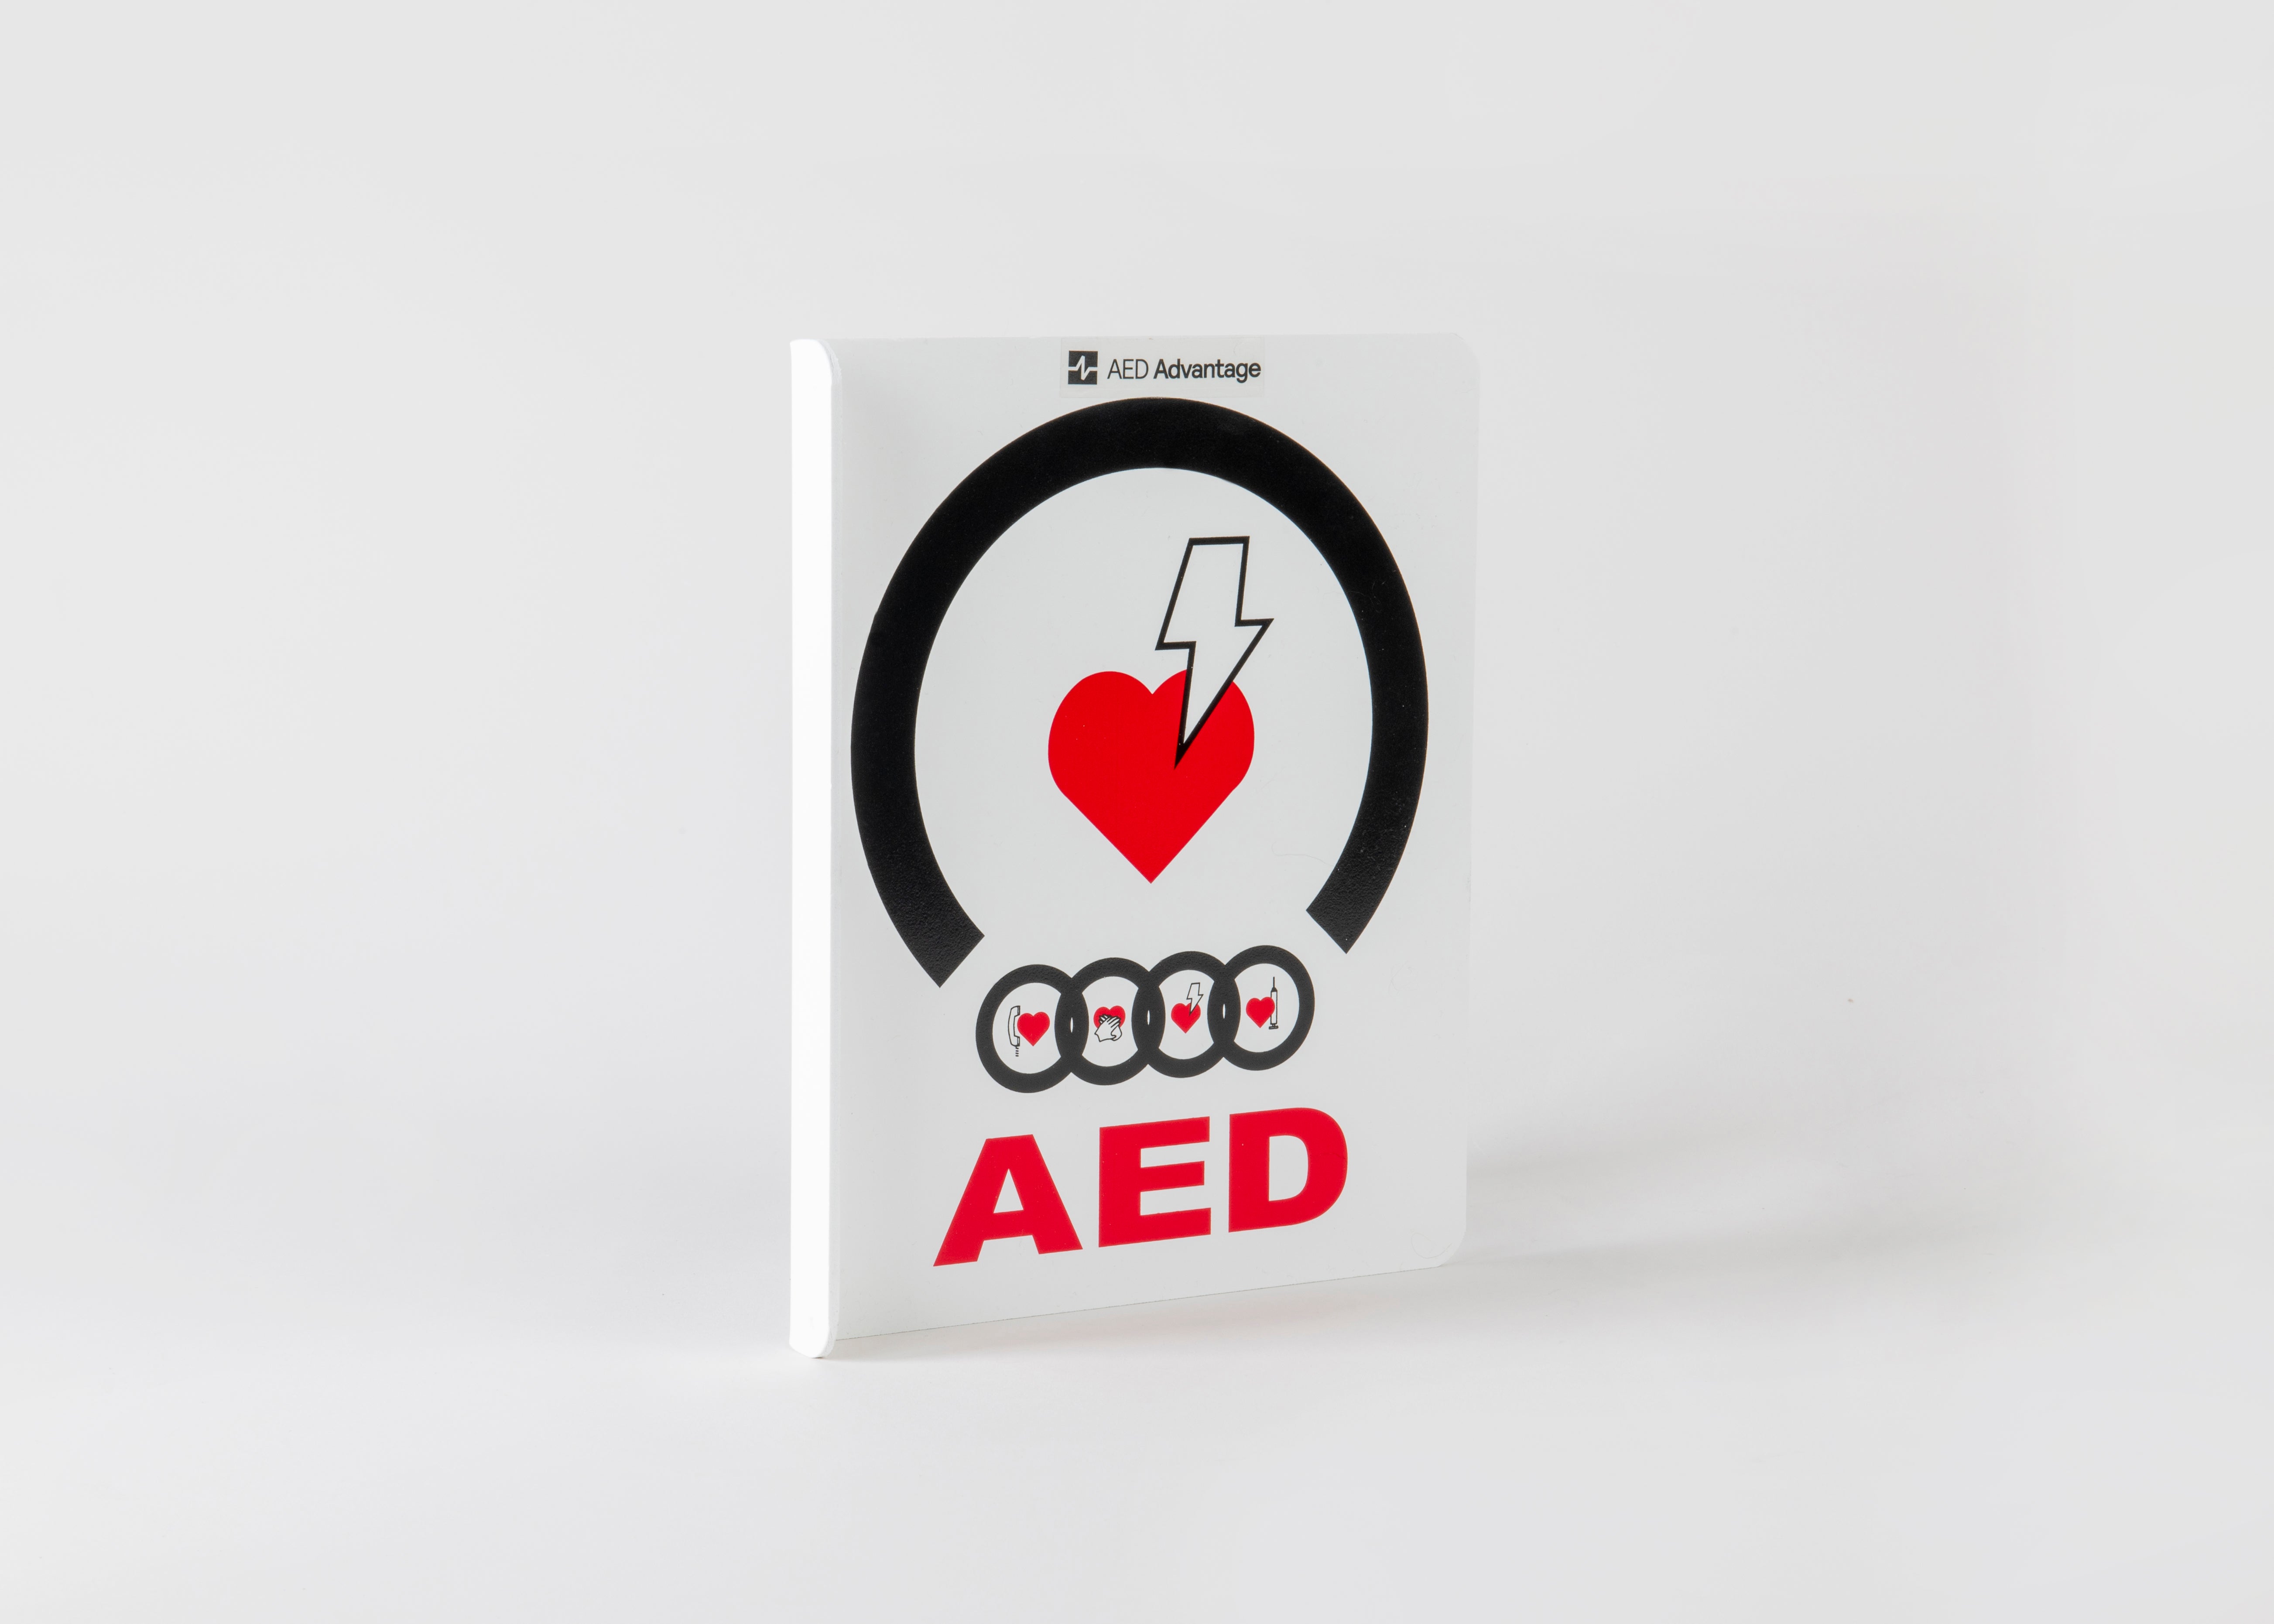 A white plastic rectangular wall sign containing large bold text indicating an AED is present 